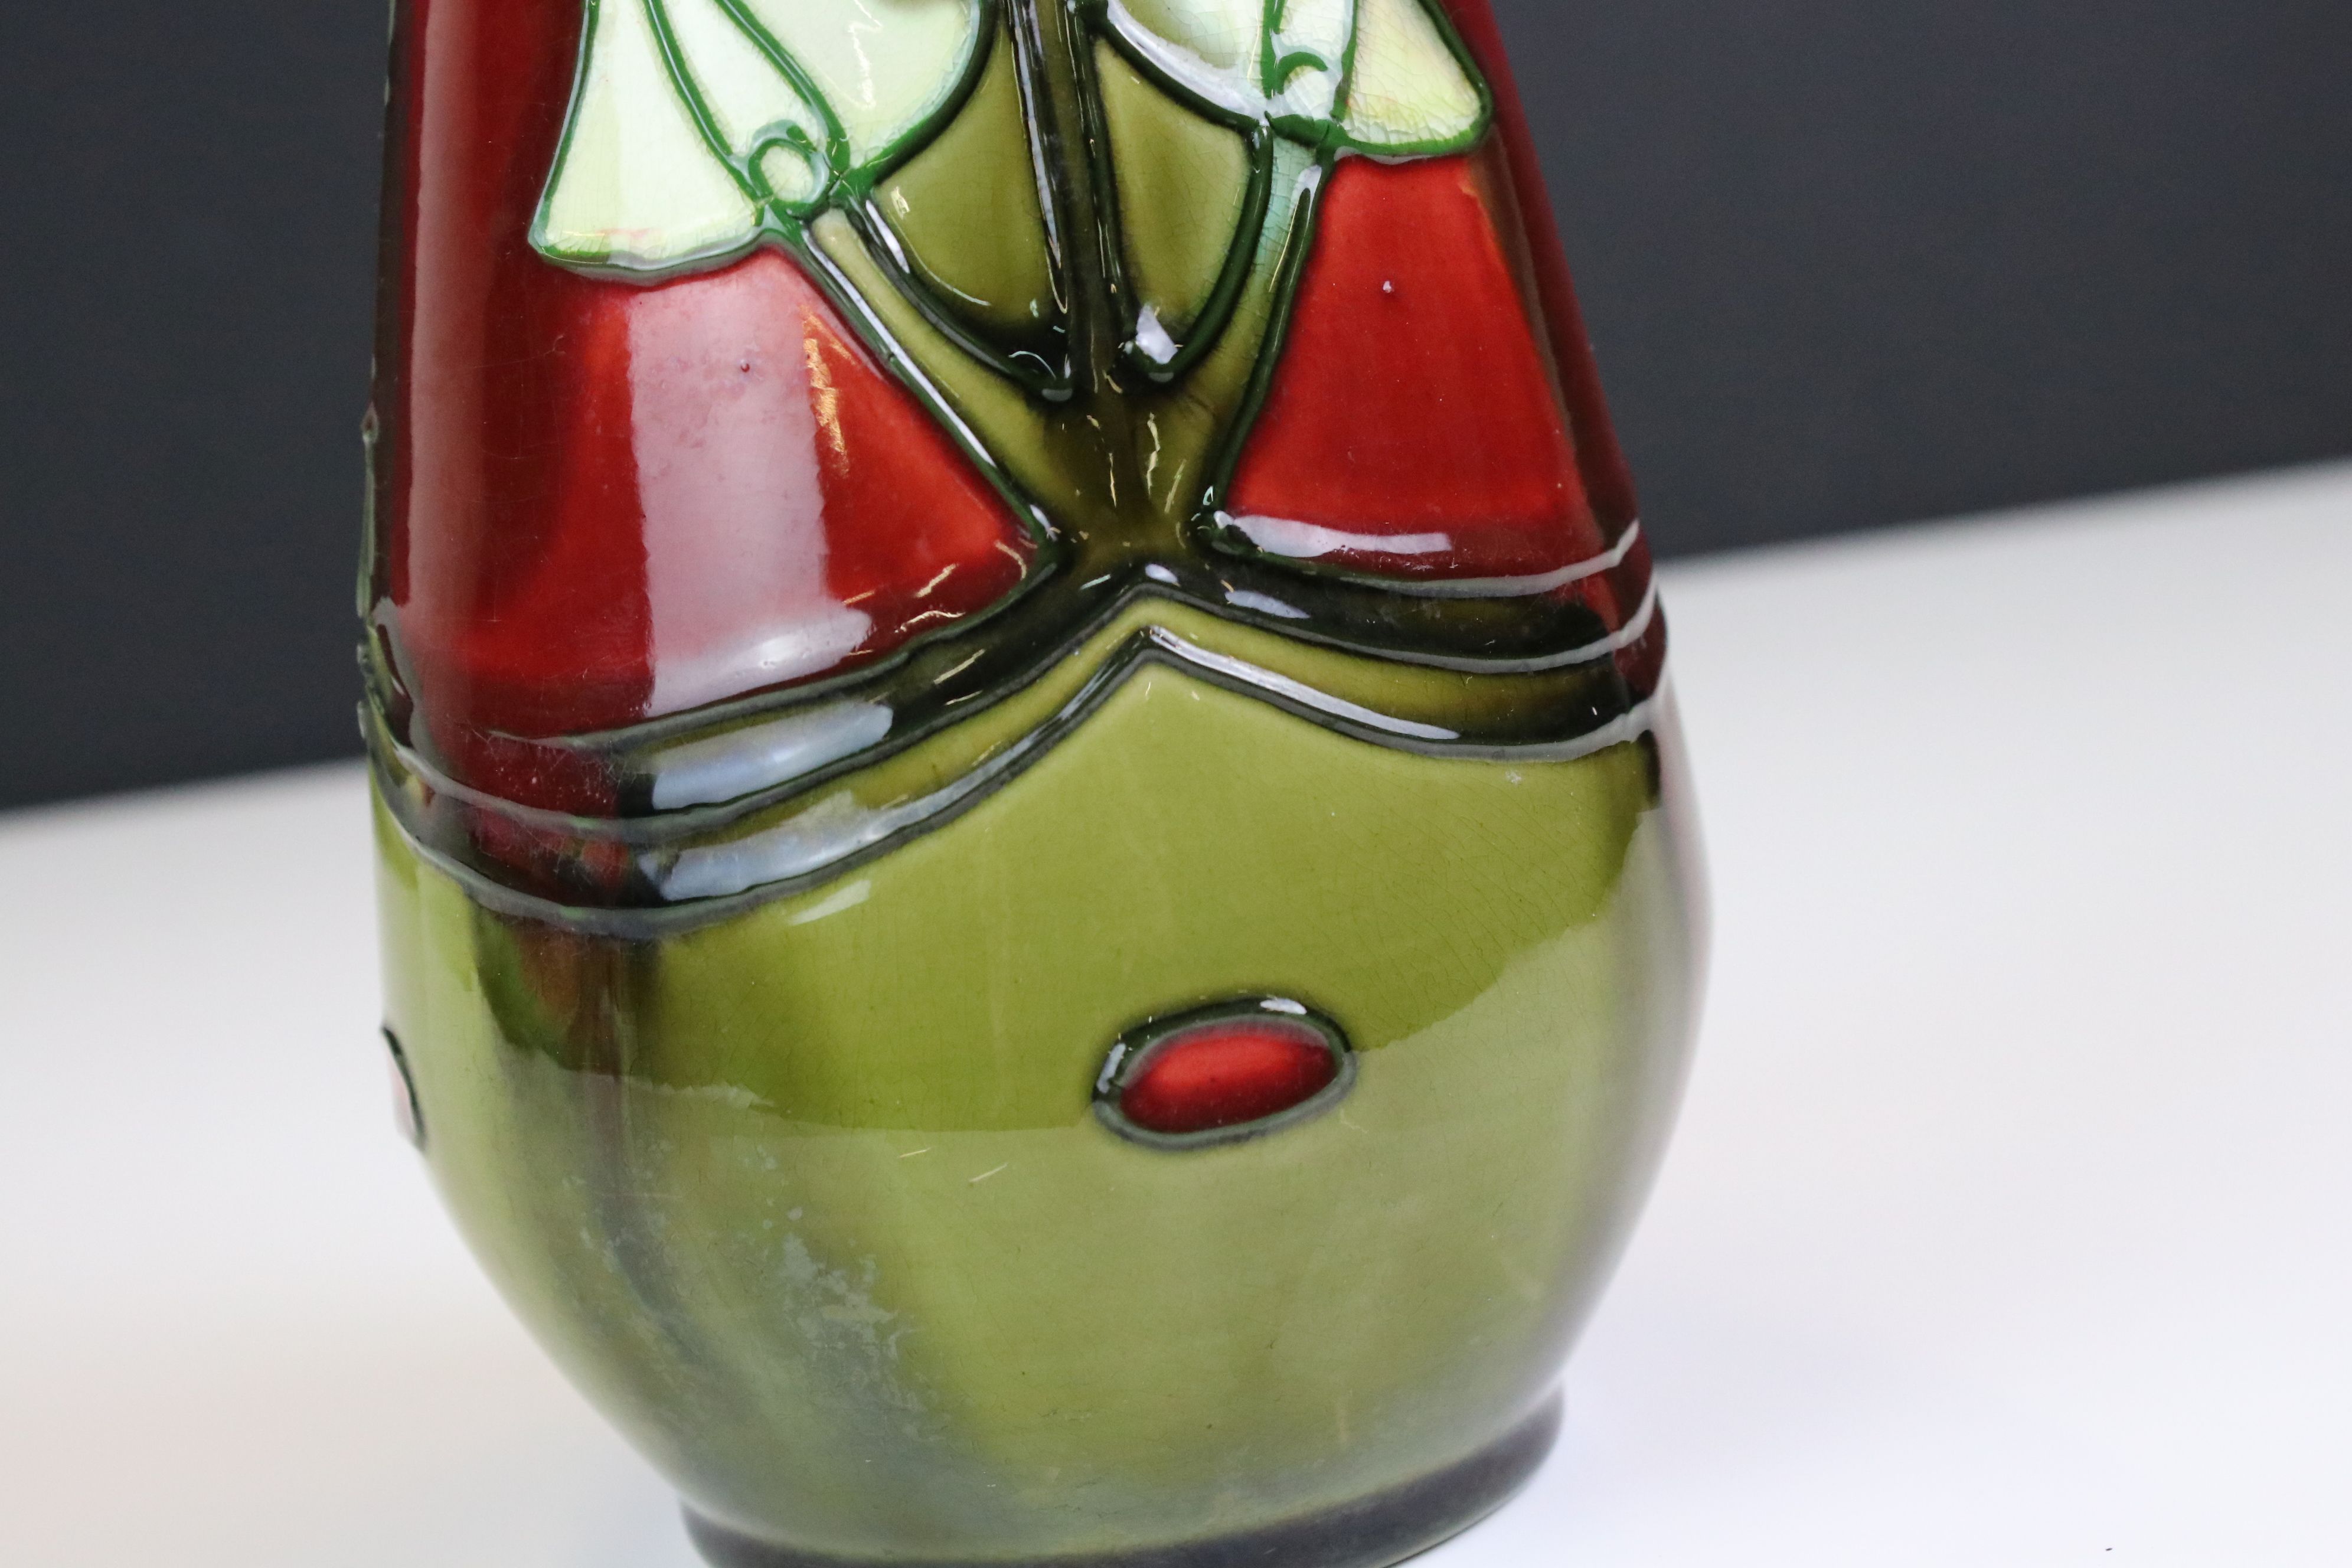 Minton Secessionist Red and Green Glazed Twin Handled Vase, marked No. 12 to base, 21cm high - Image 3 of 7